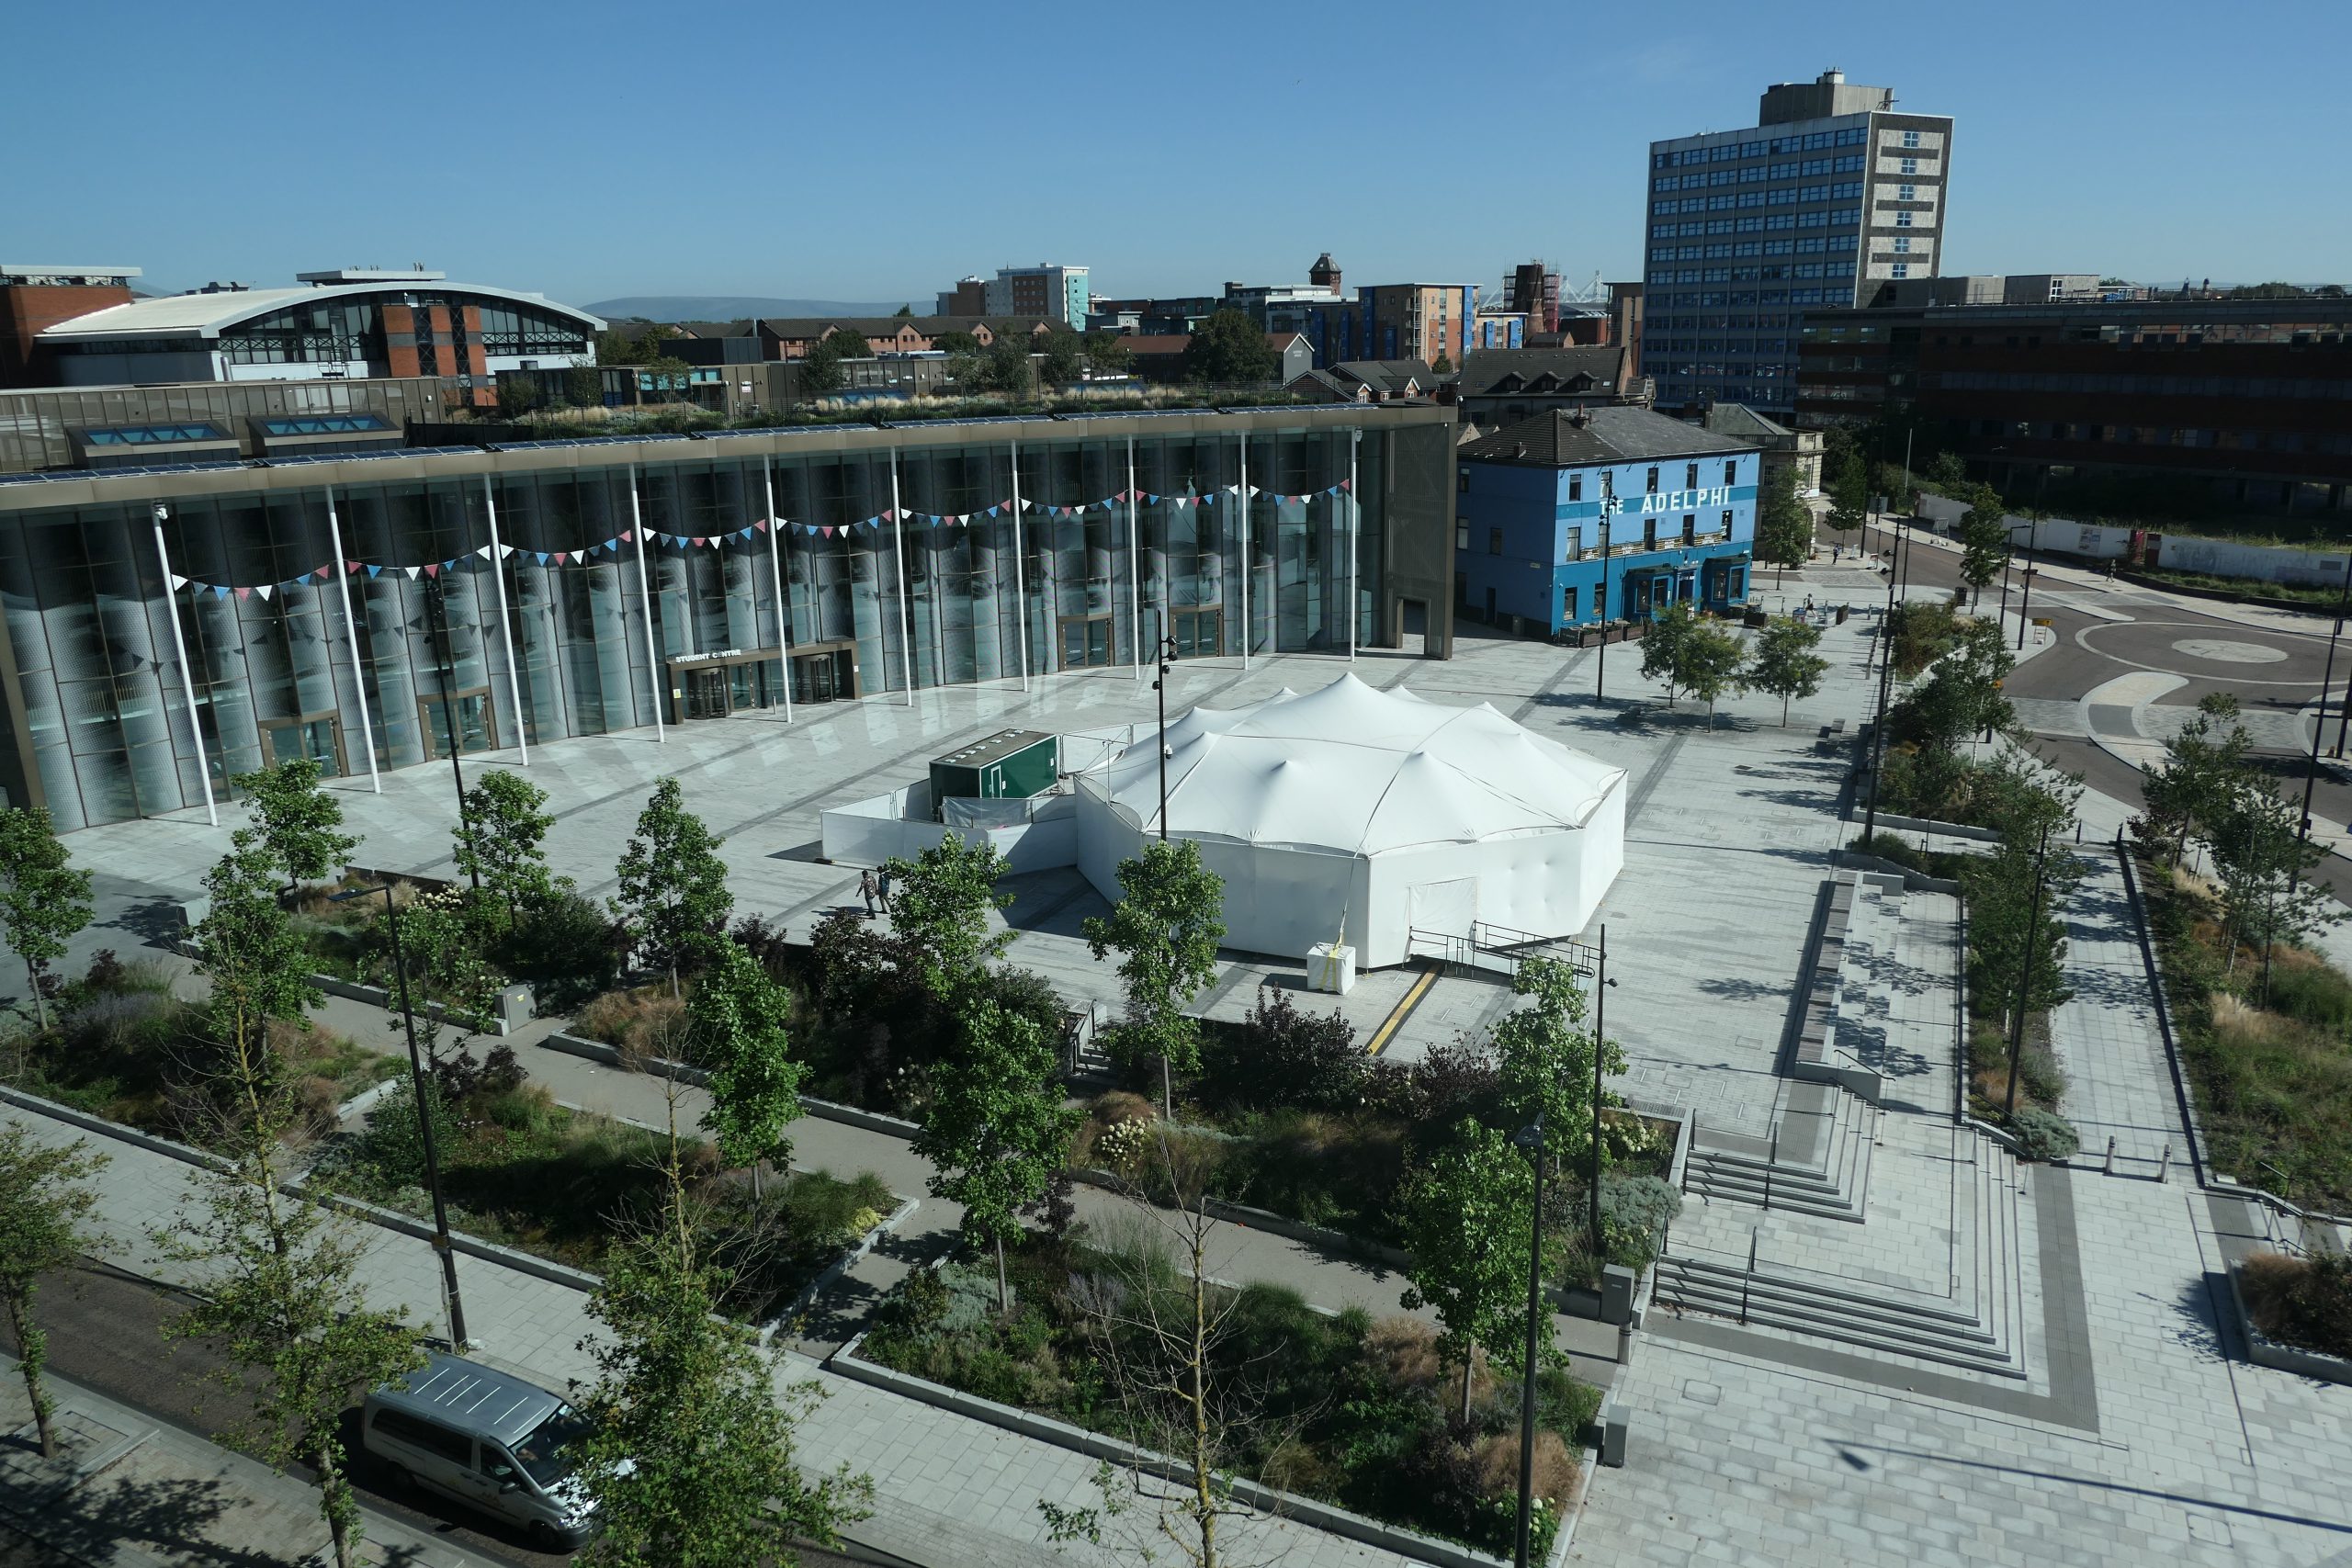 An aerial shot of the MET installed on University Square UCLan.